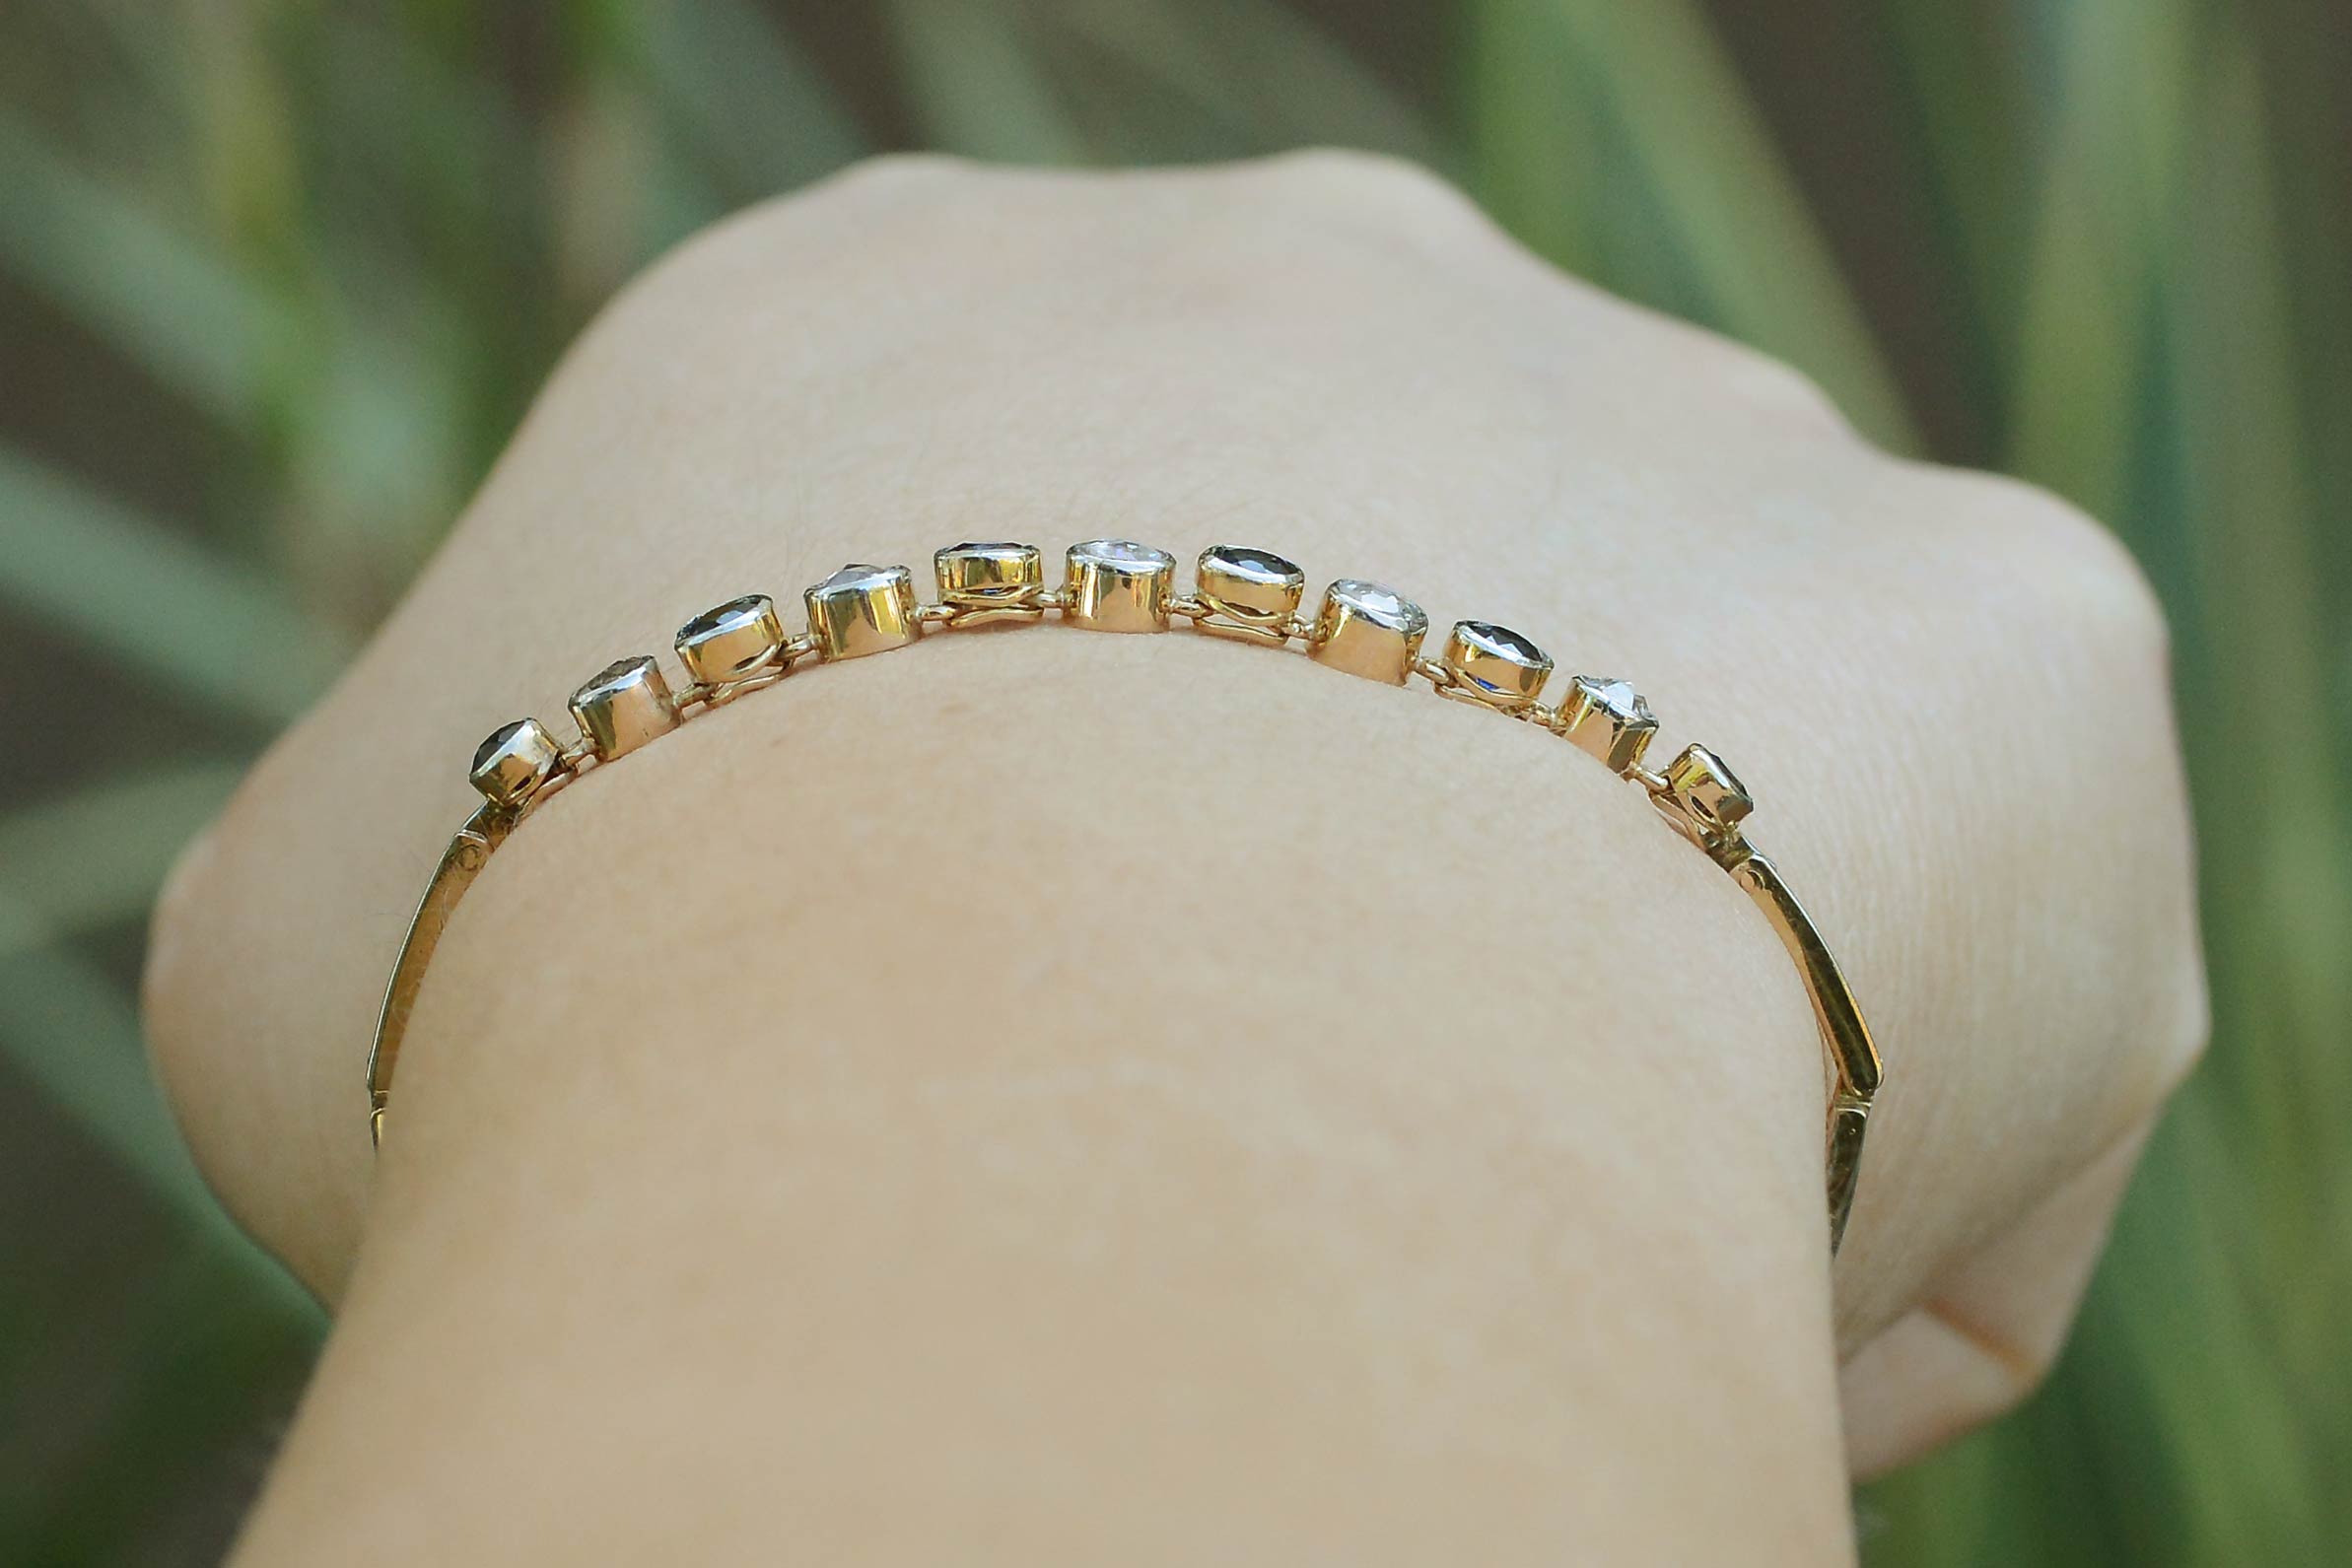 Distinguishable, alternating gems, each set in their own collet in this line bracelet.